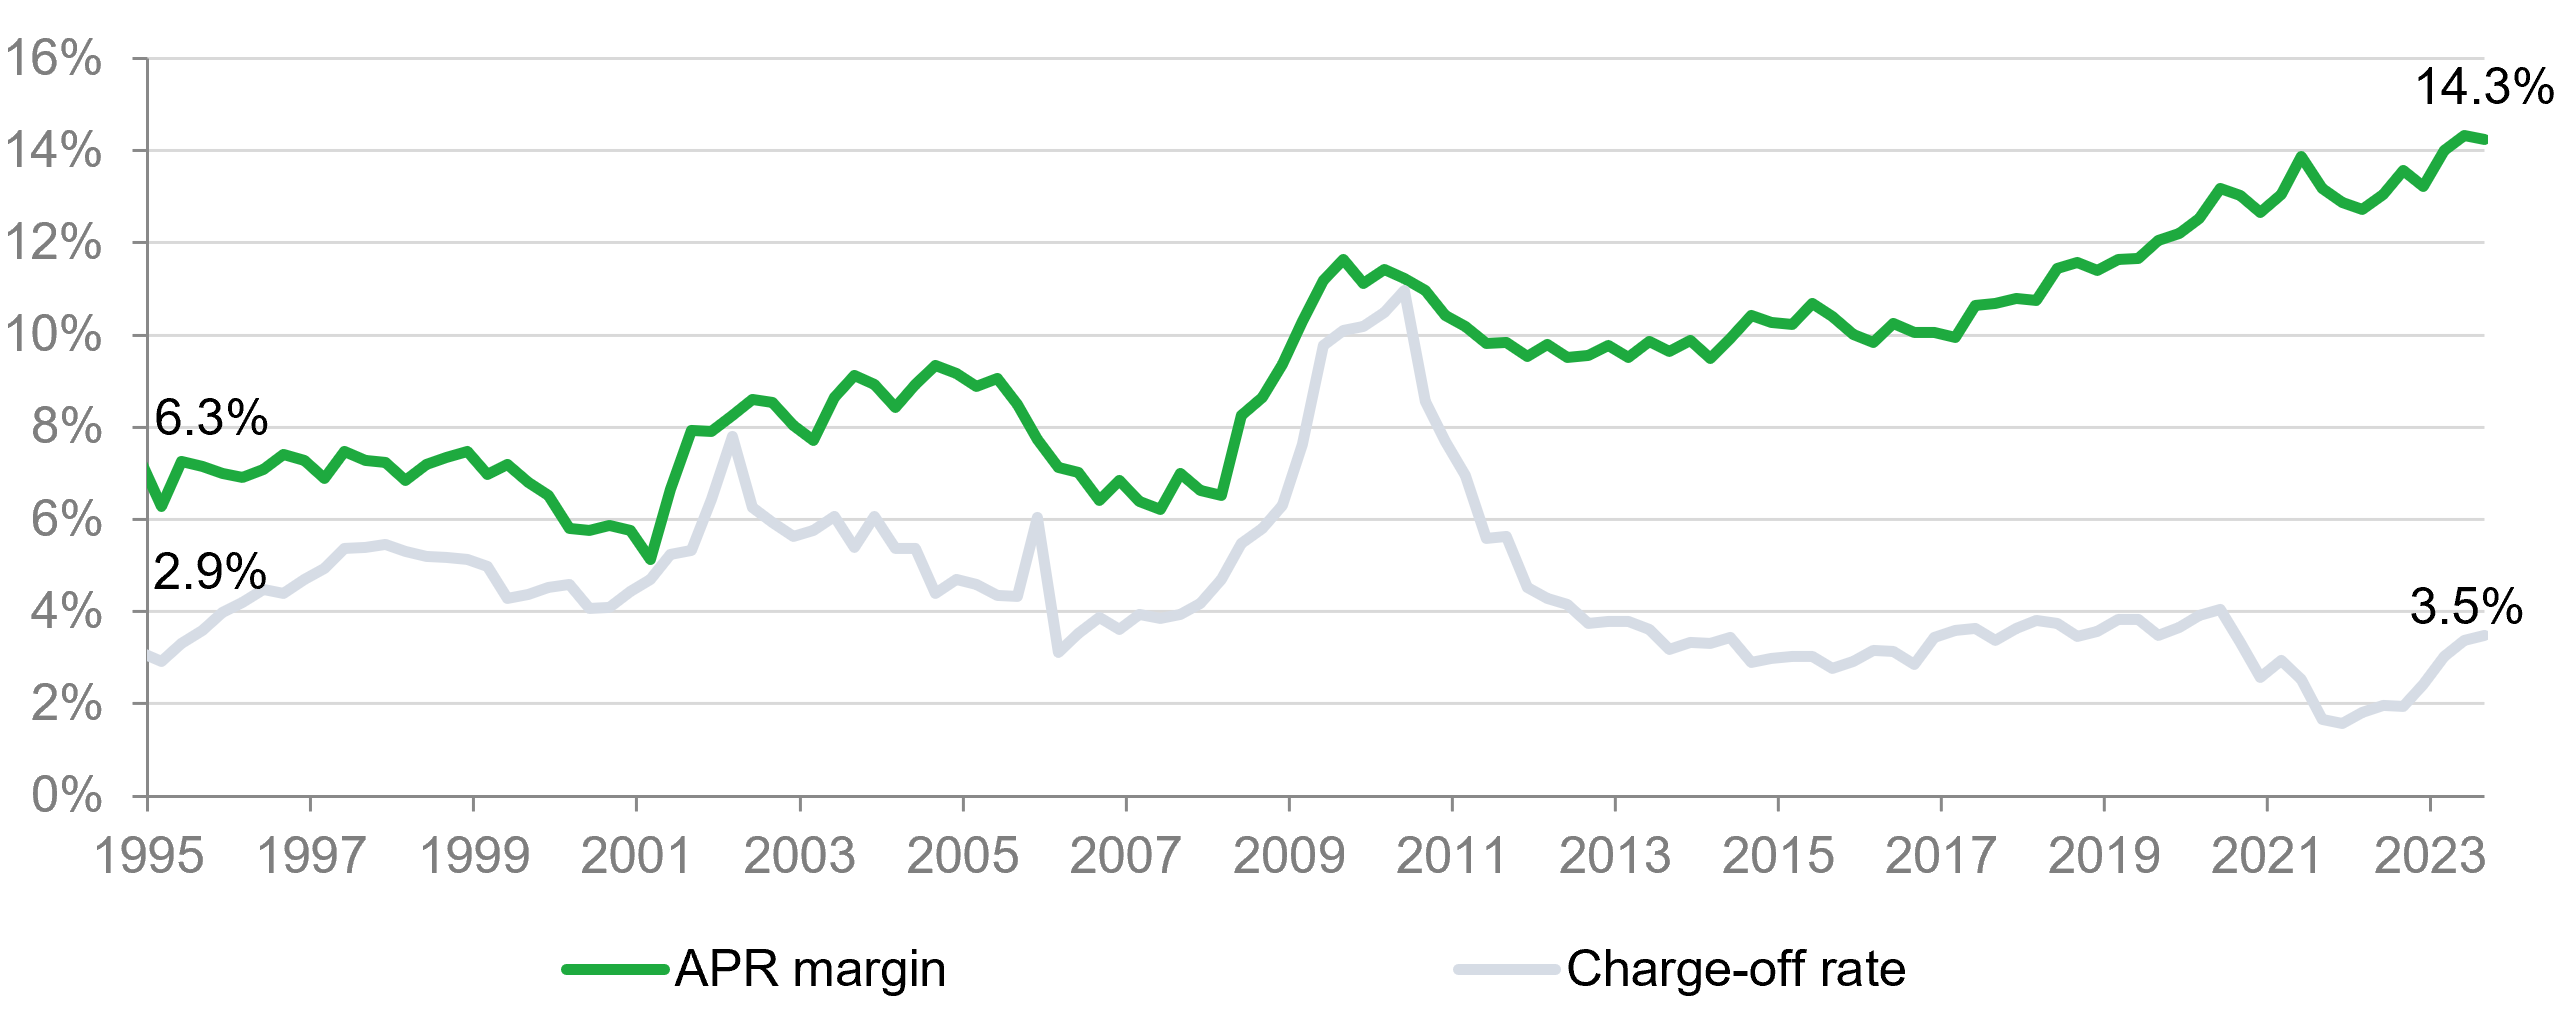 Figure 2 is a line graph that shows the quarterly average APR margin and charge off rate from 1995 through 2023. Since 2013, the APR margin has generally increased while the charge off rate decreased.